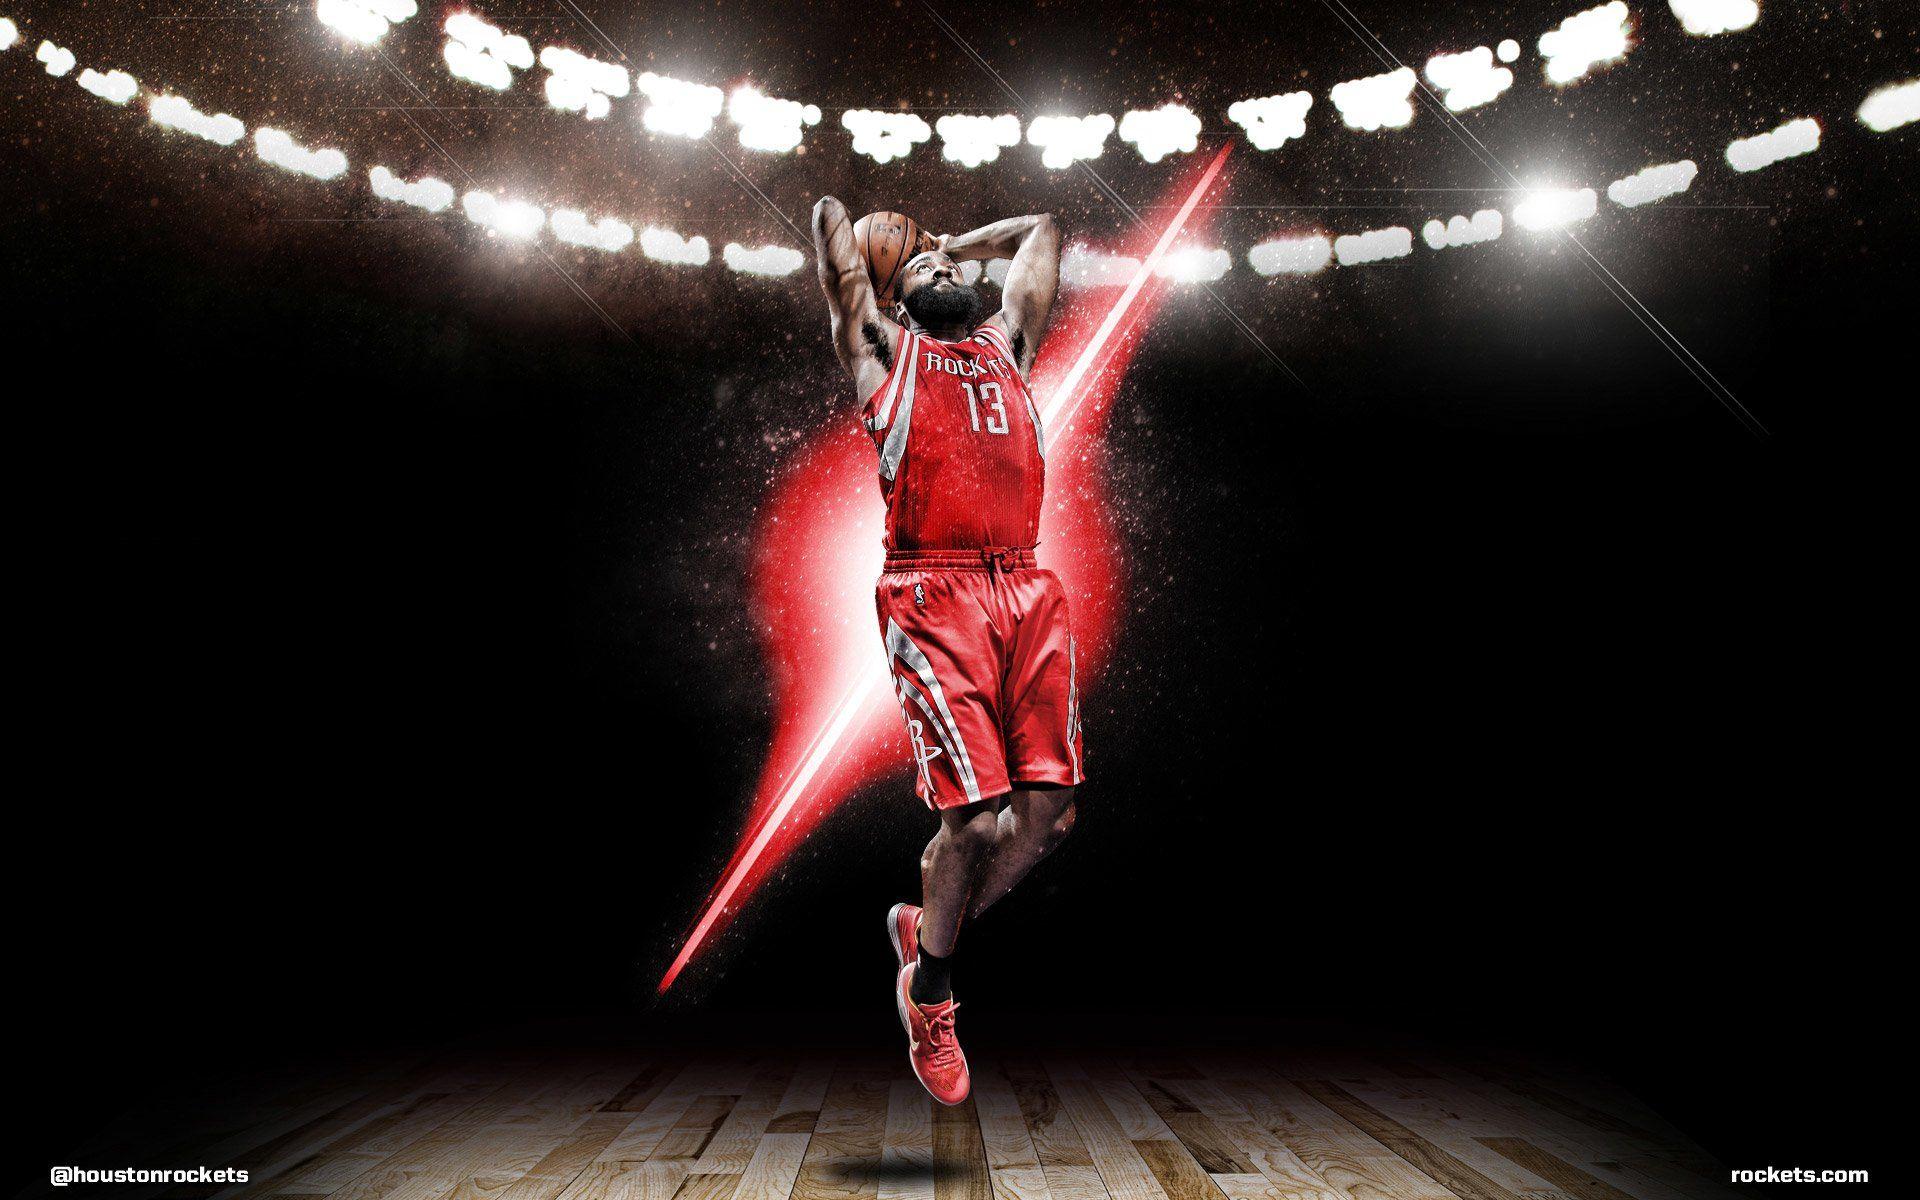 James Harden HD Wallpaper and Background Image